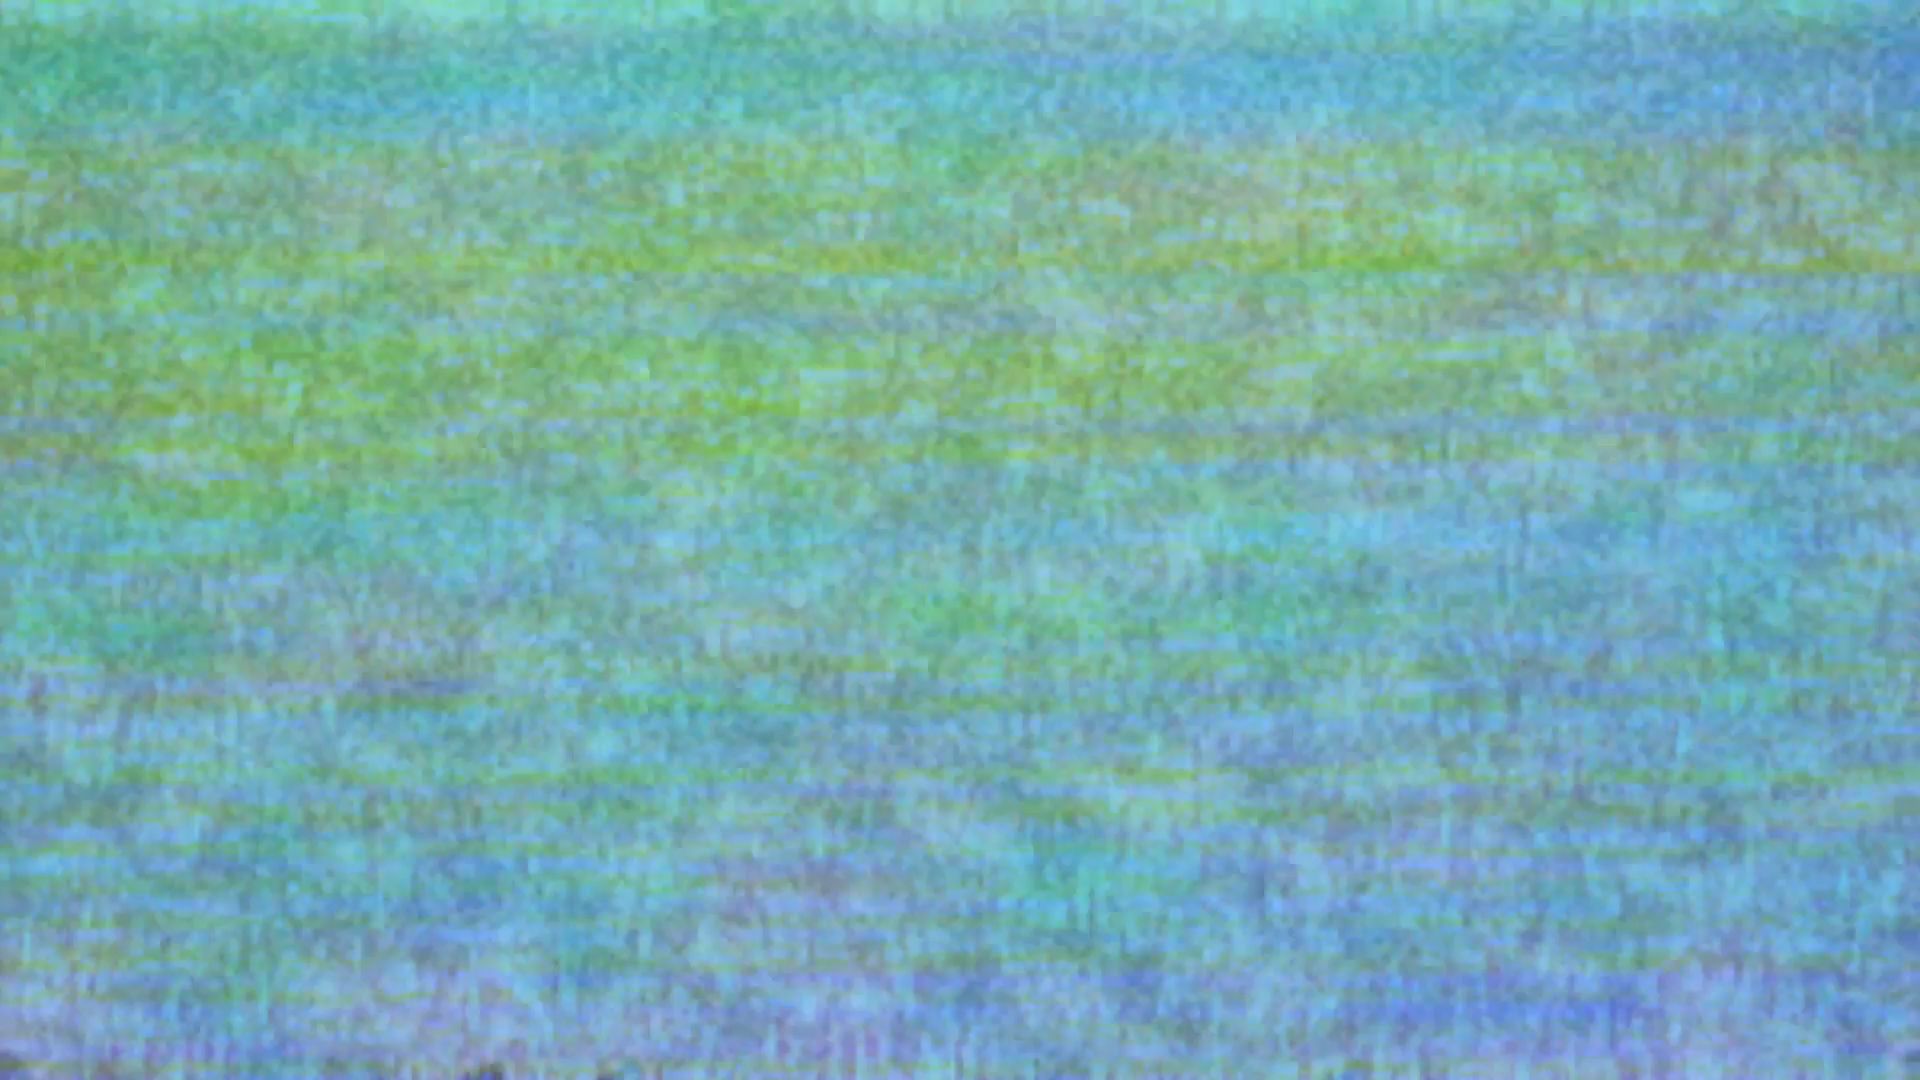 Glitchy vintage vhs video of a moving cloud